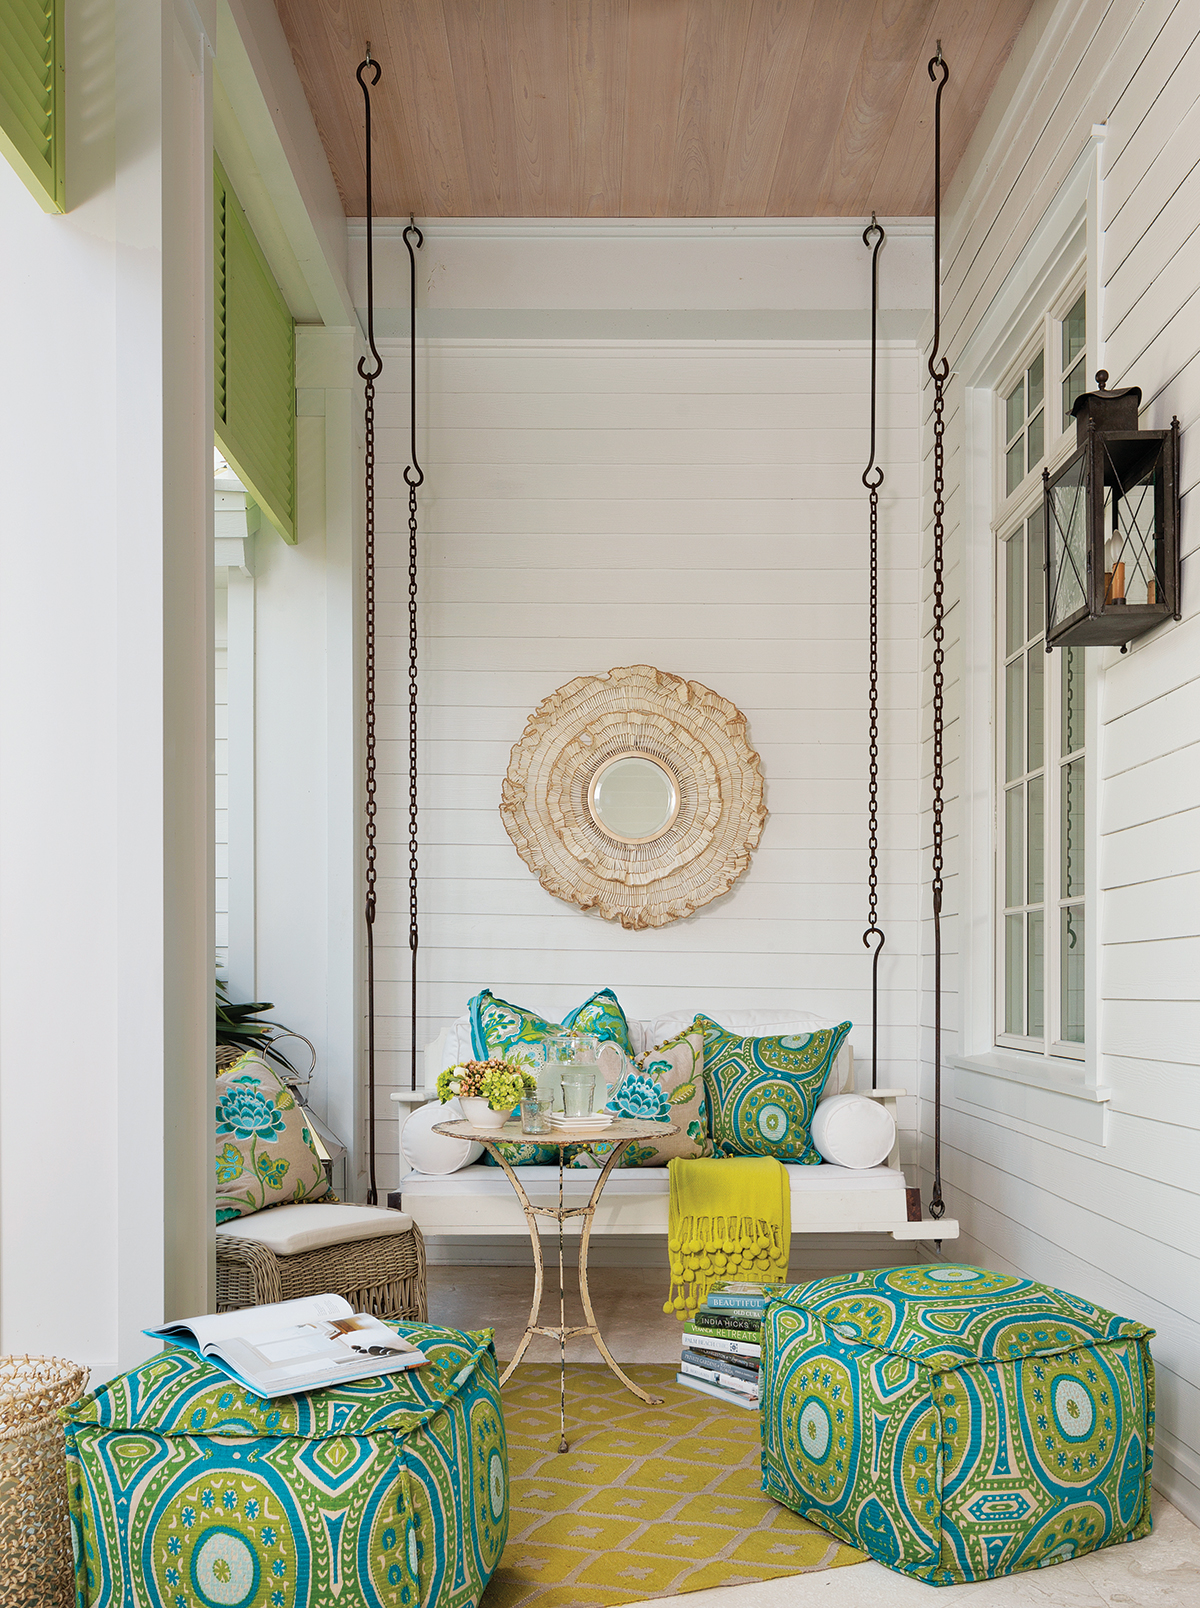 Bright patterned fabrics in ottomans and accent pillows continue outdoors on the cozy front porch. A rattan mirror from Palecek and a vintage bistro table convey an earthy vibe, while ottomans clad in a chartreuse-and-turquoise print provide extra seating.